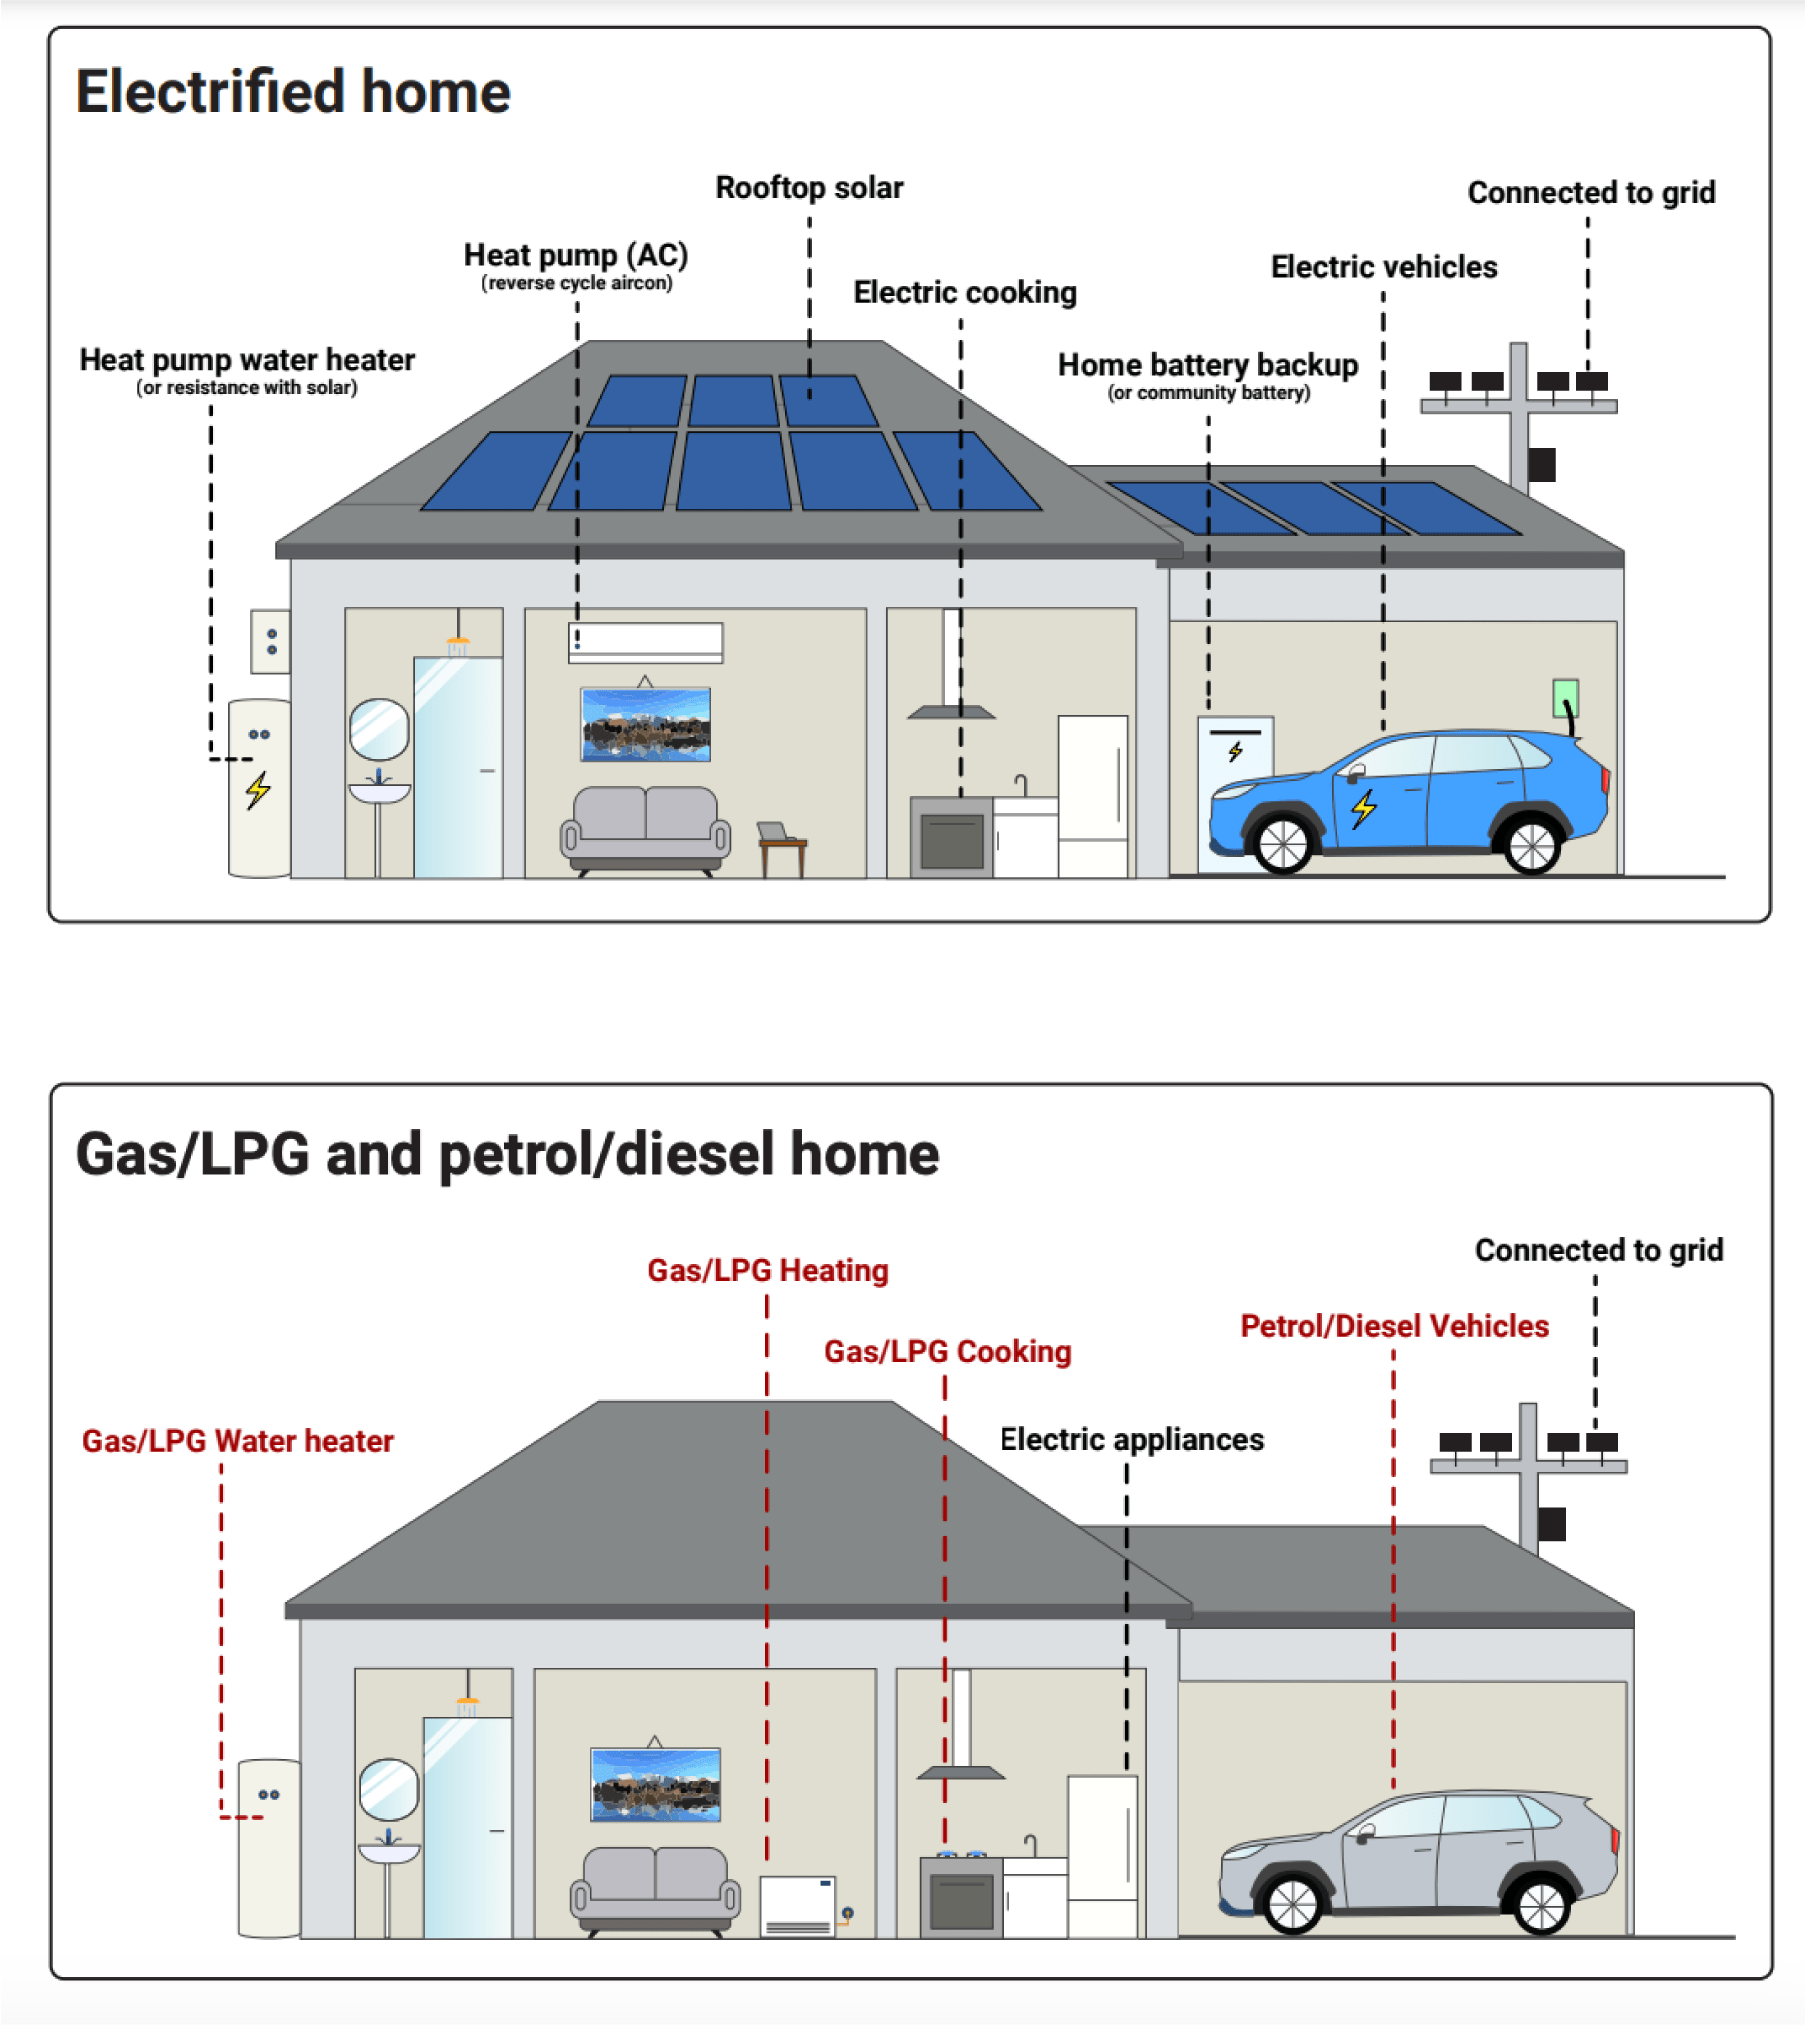 Electrified home vs other@4x min